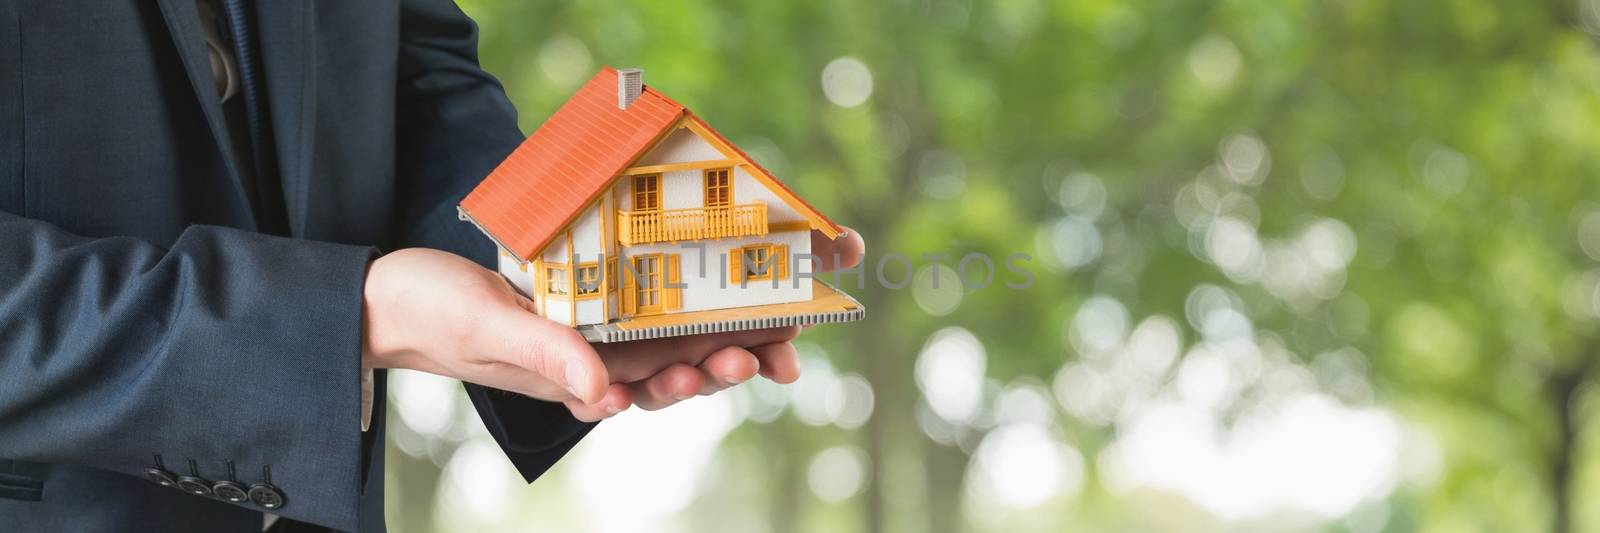 Man holding a house as house insurance concept by Wavebreakmedia